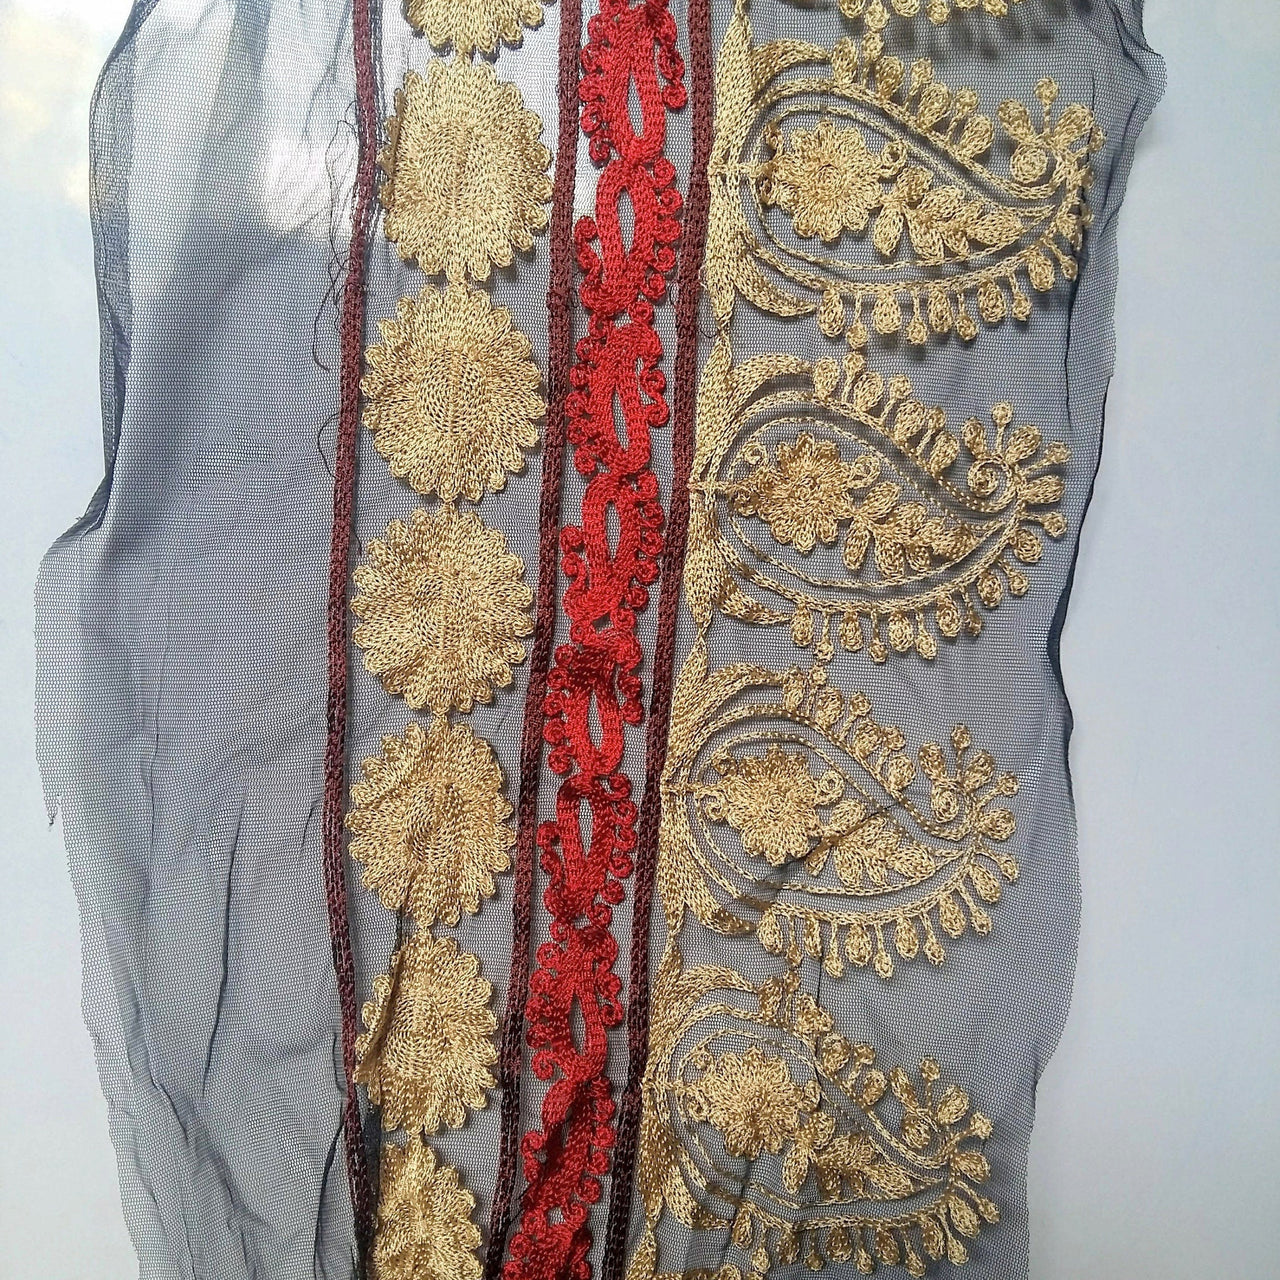 Black Soft Net Lace Trim With Red, Beige And Brown Floral And Paisley Embroidery, Indian Trims